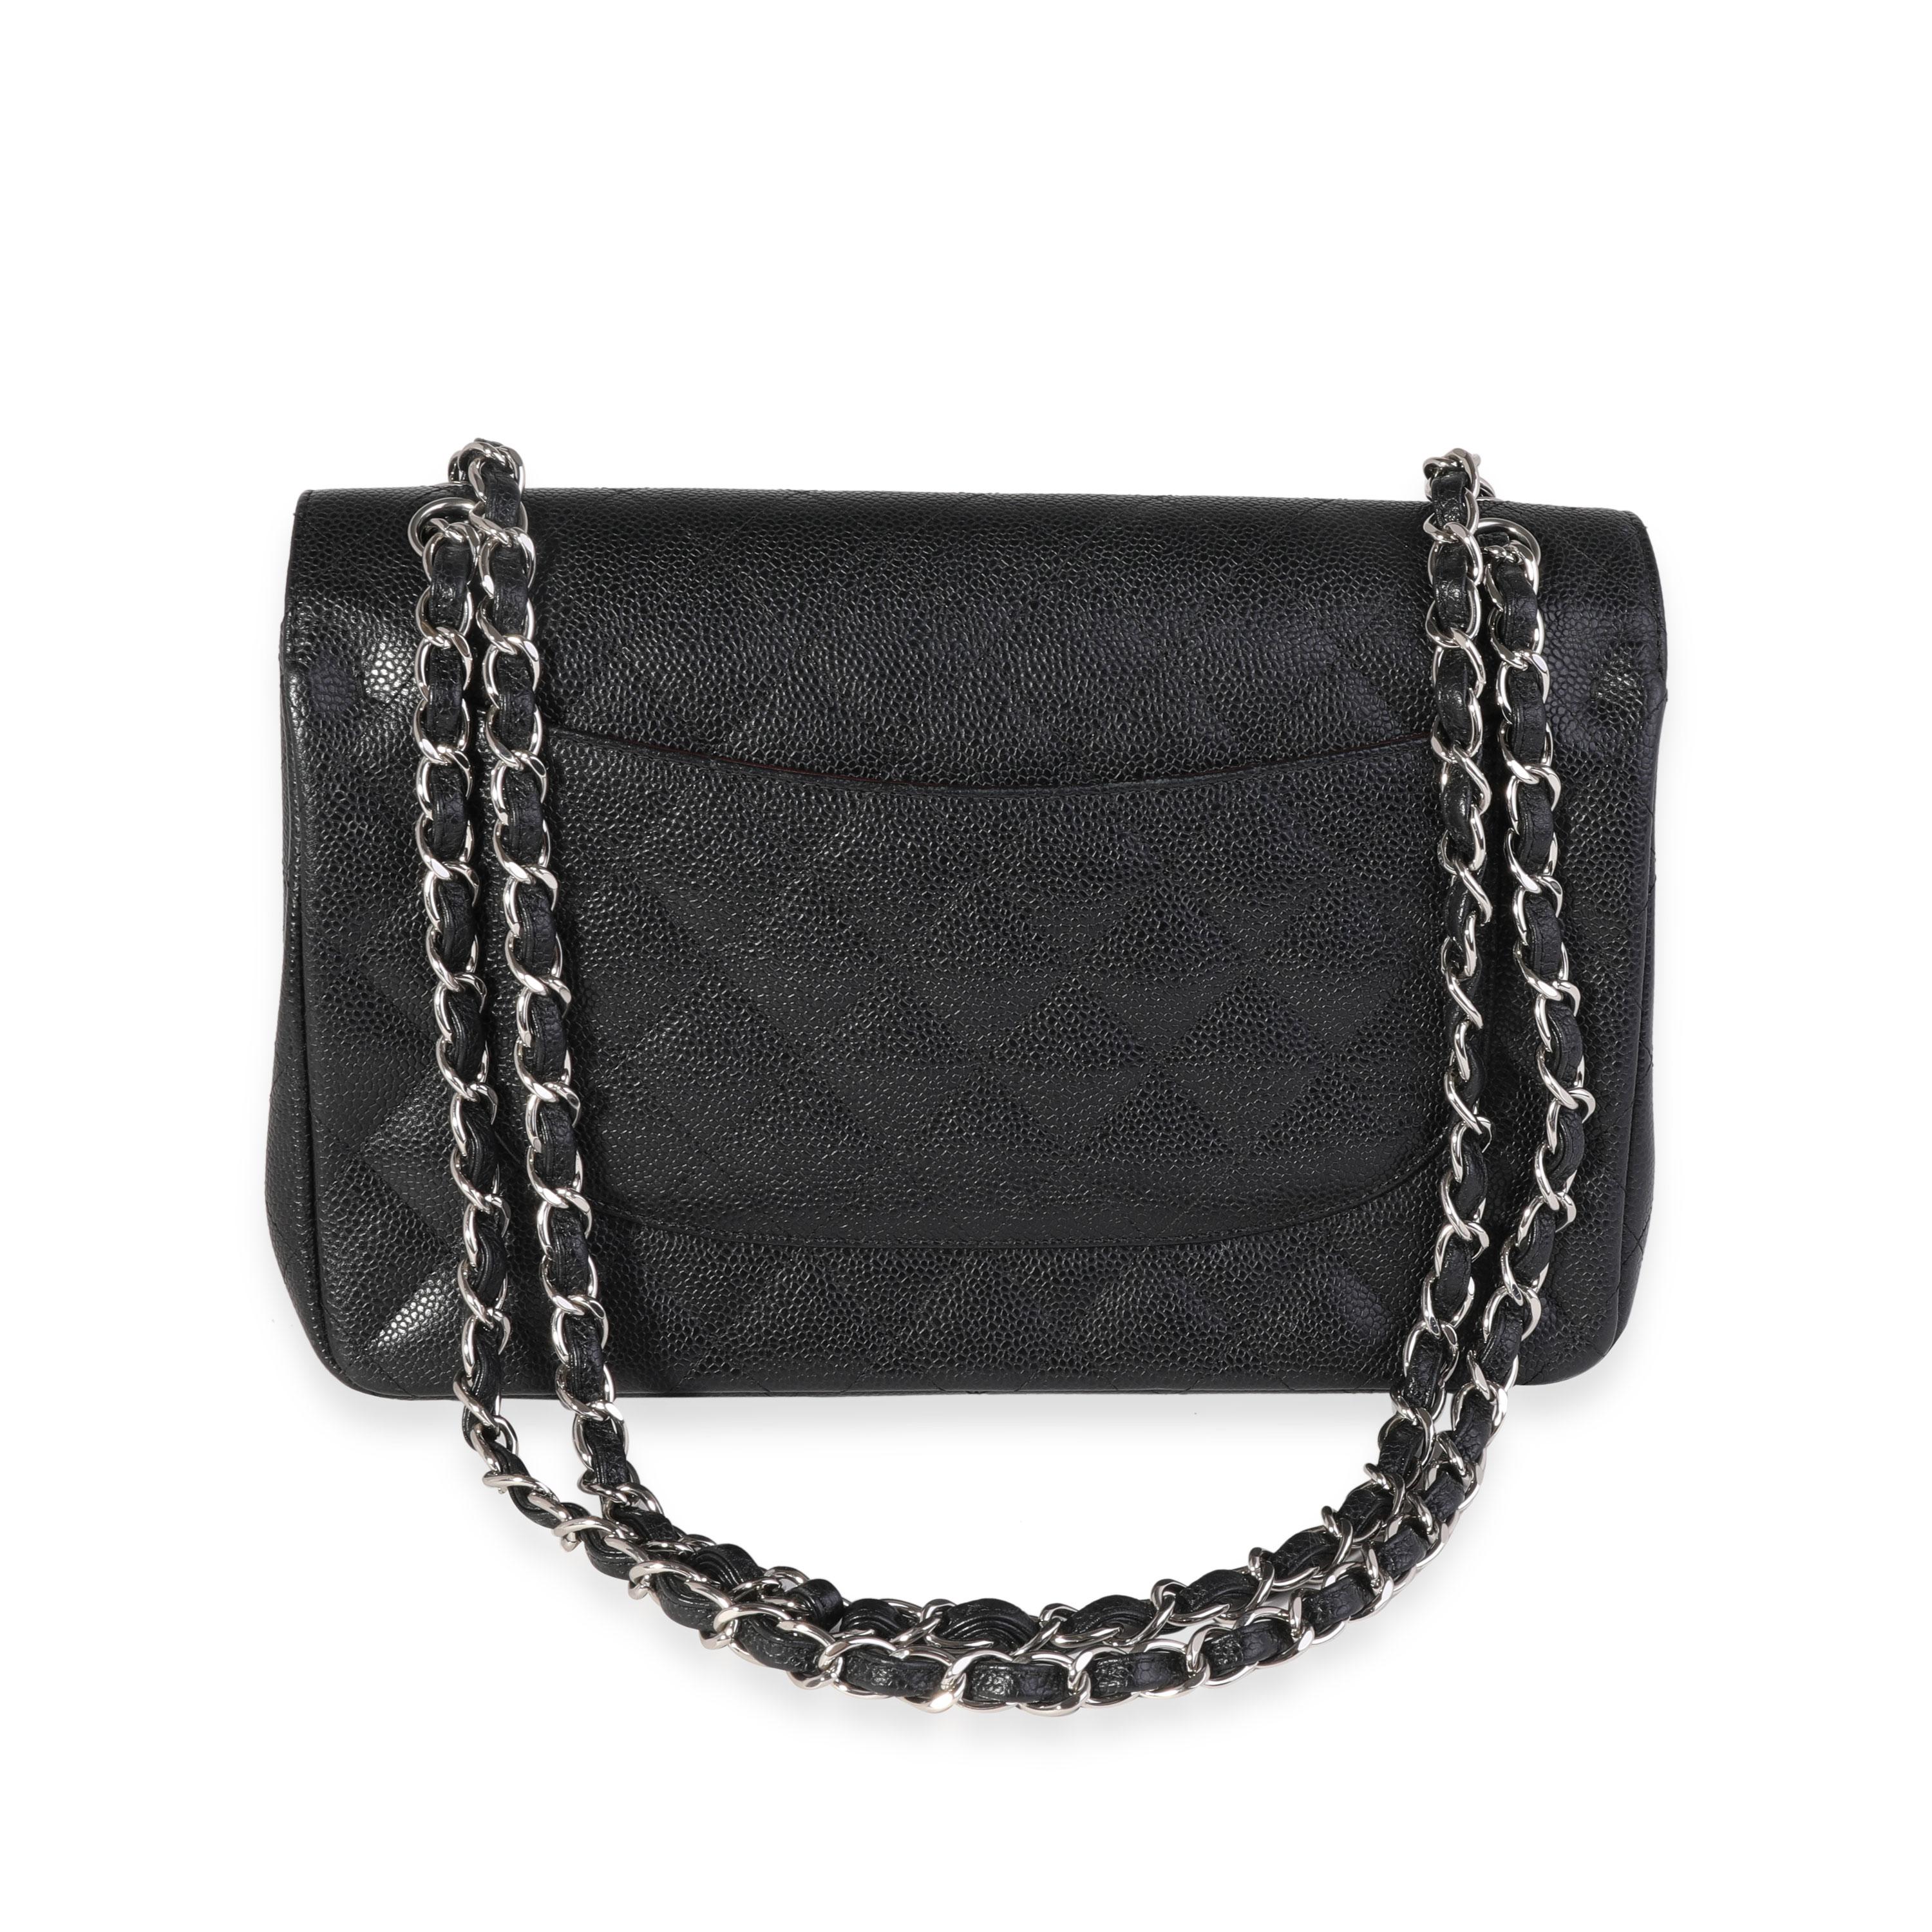 Listing Title: Chanel Black Quilted Caviar Jumbo Classic Double Flap Bag
SKU: 121585
MSRP: 9500.00
Condition: Pre-owned 
Handbag Condition: Very Good
Condition Comments: Very Good Condition. Scuffing at corners. Minor scratching at hardware.